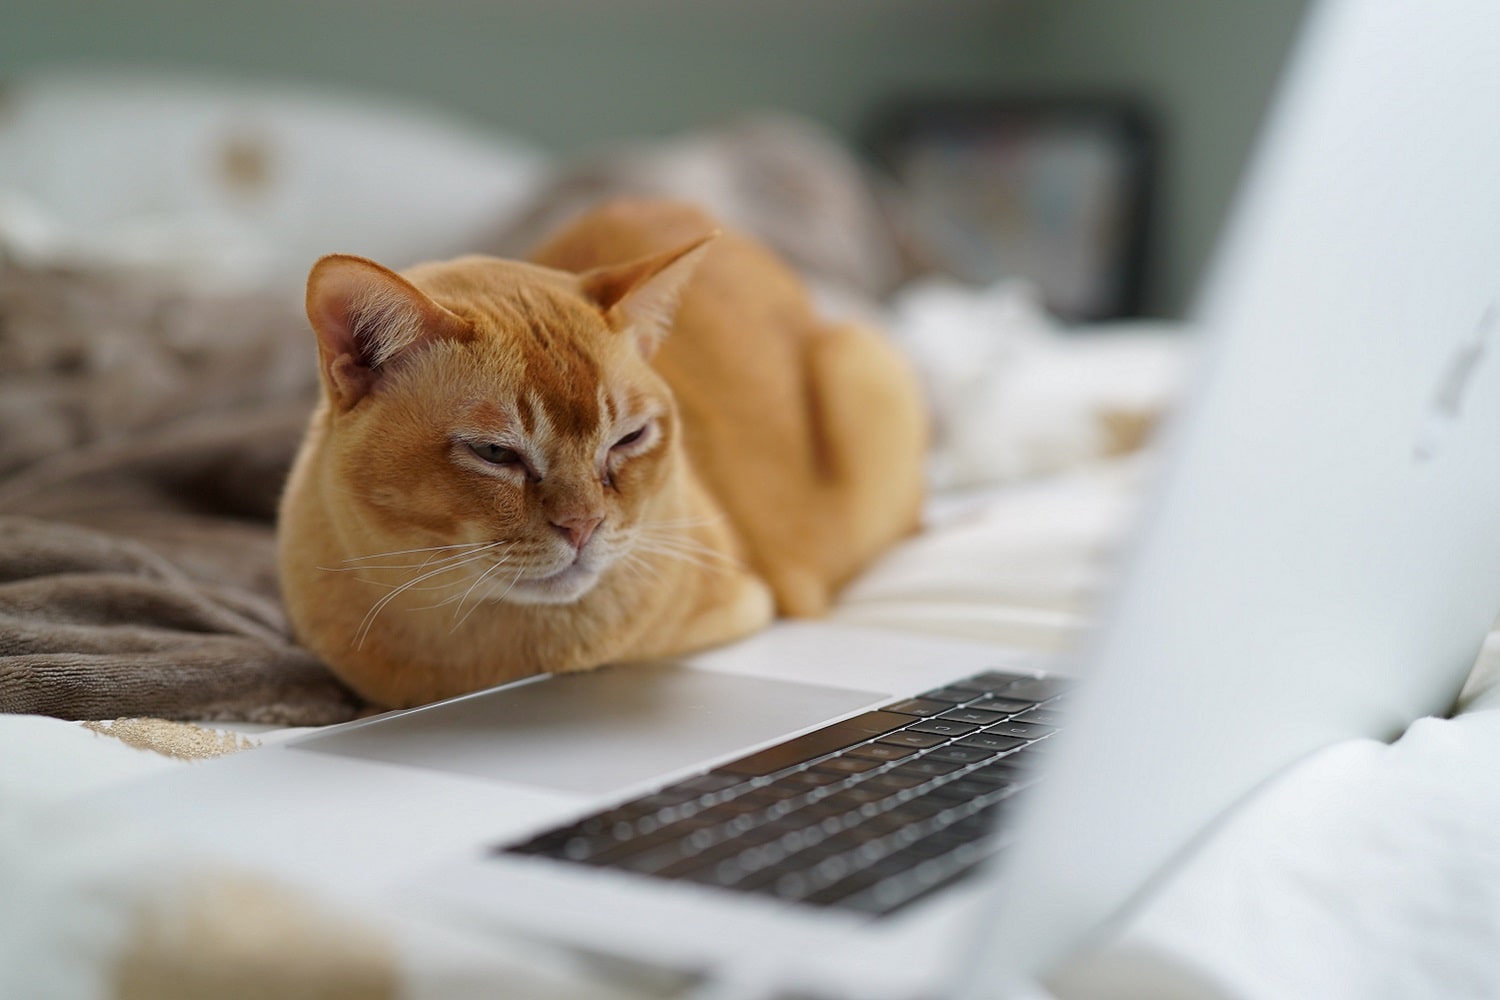 A cat looking at a laptop, using software to help calculate Amazon prices.